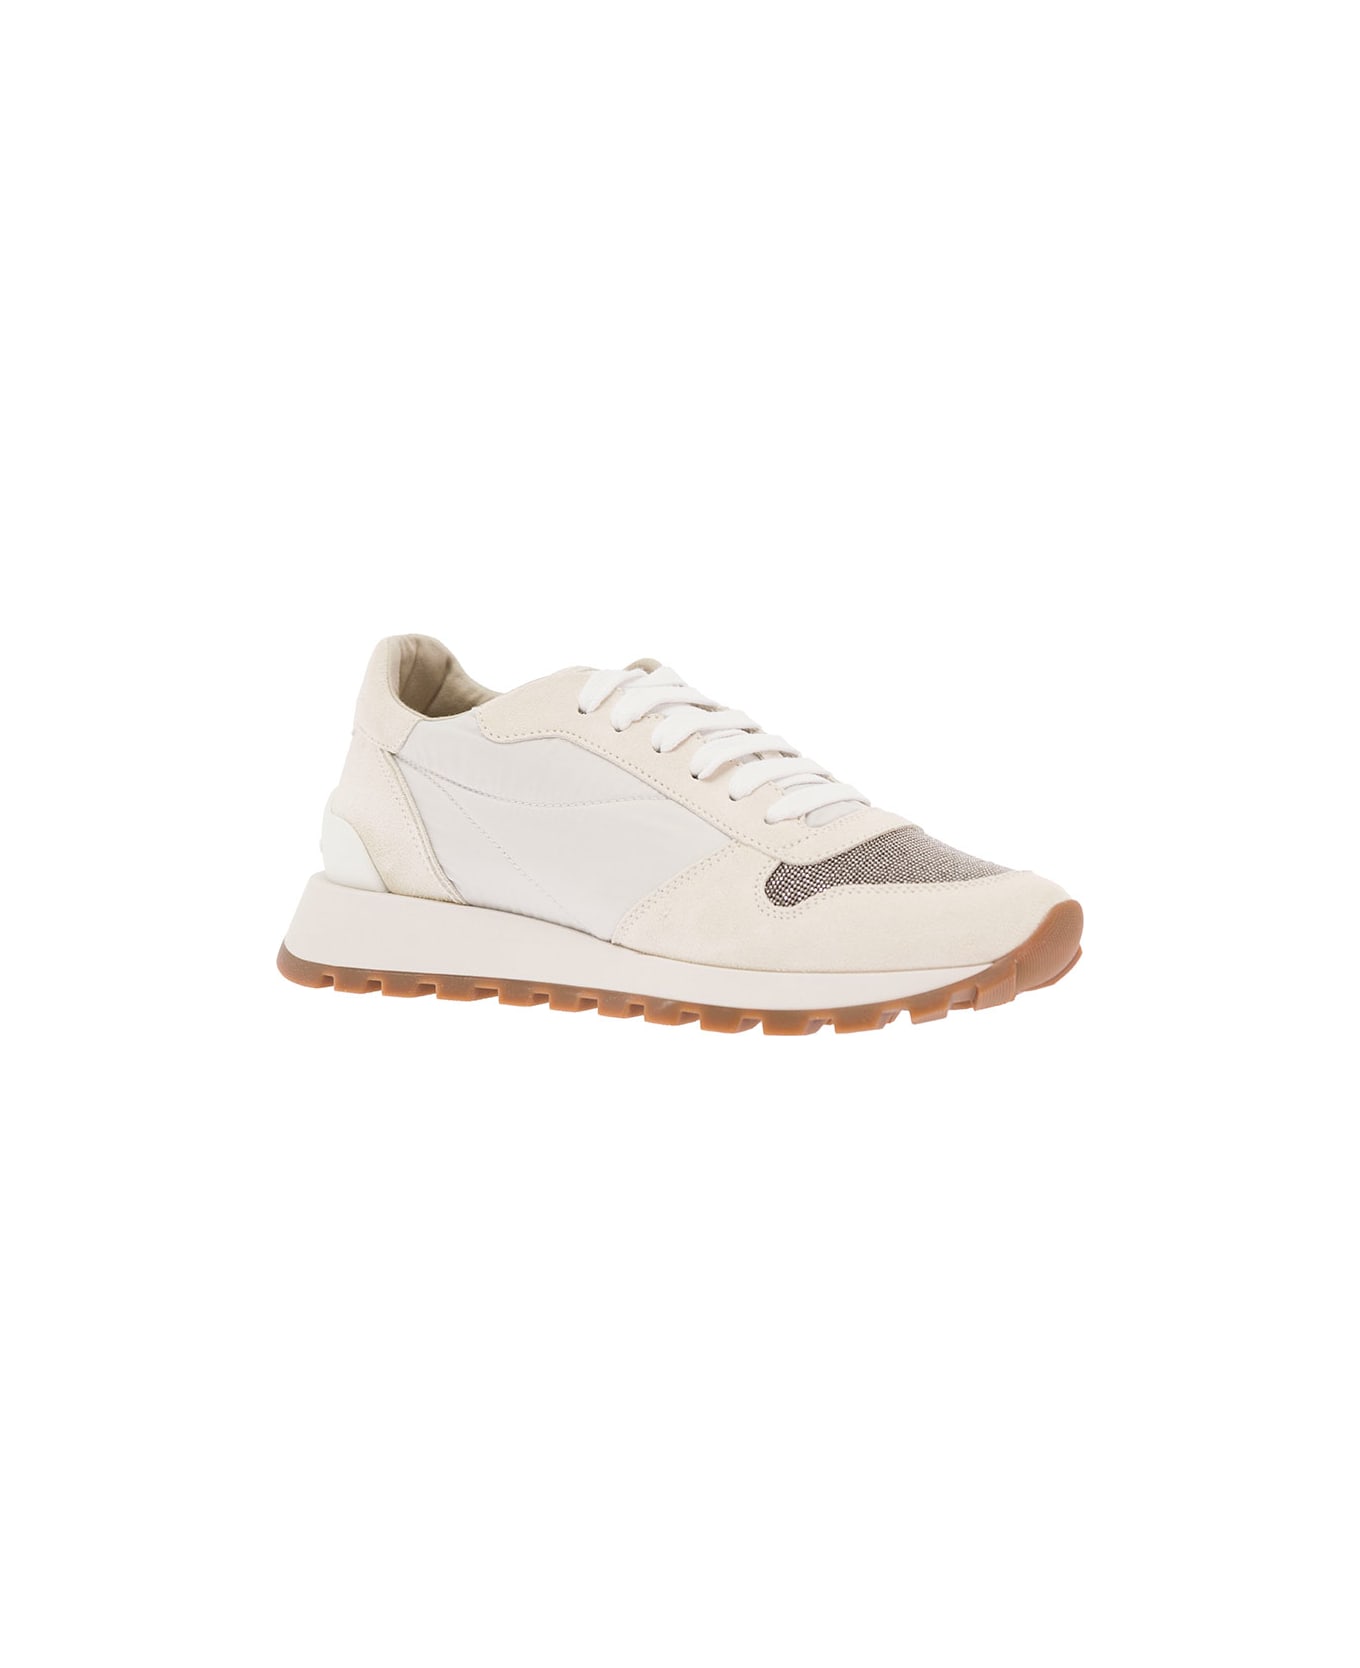 Brunello Cucinelli Woman's Runner White Leather Sneakers With Monile Insert - White